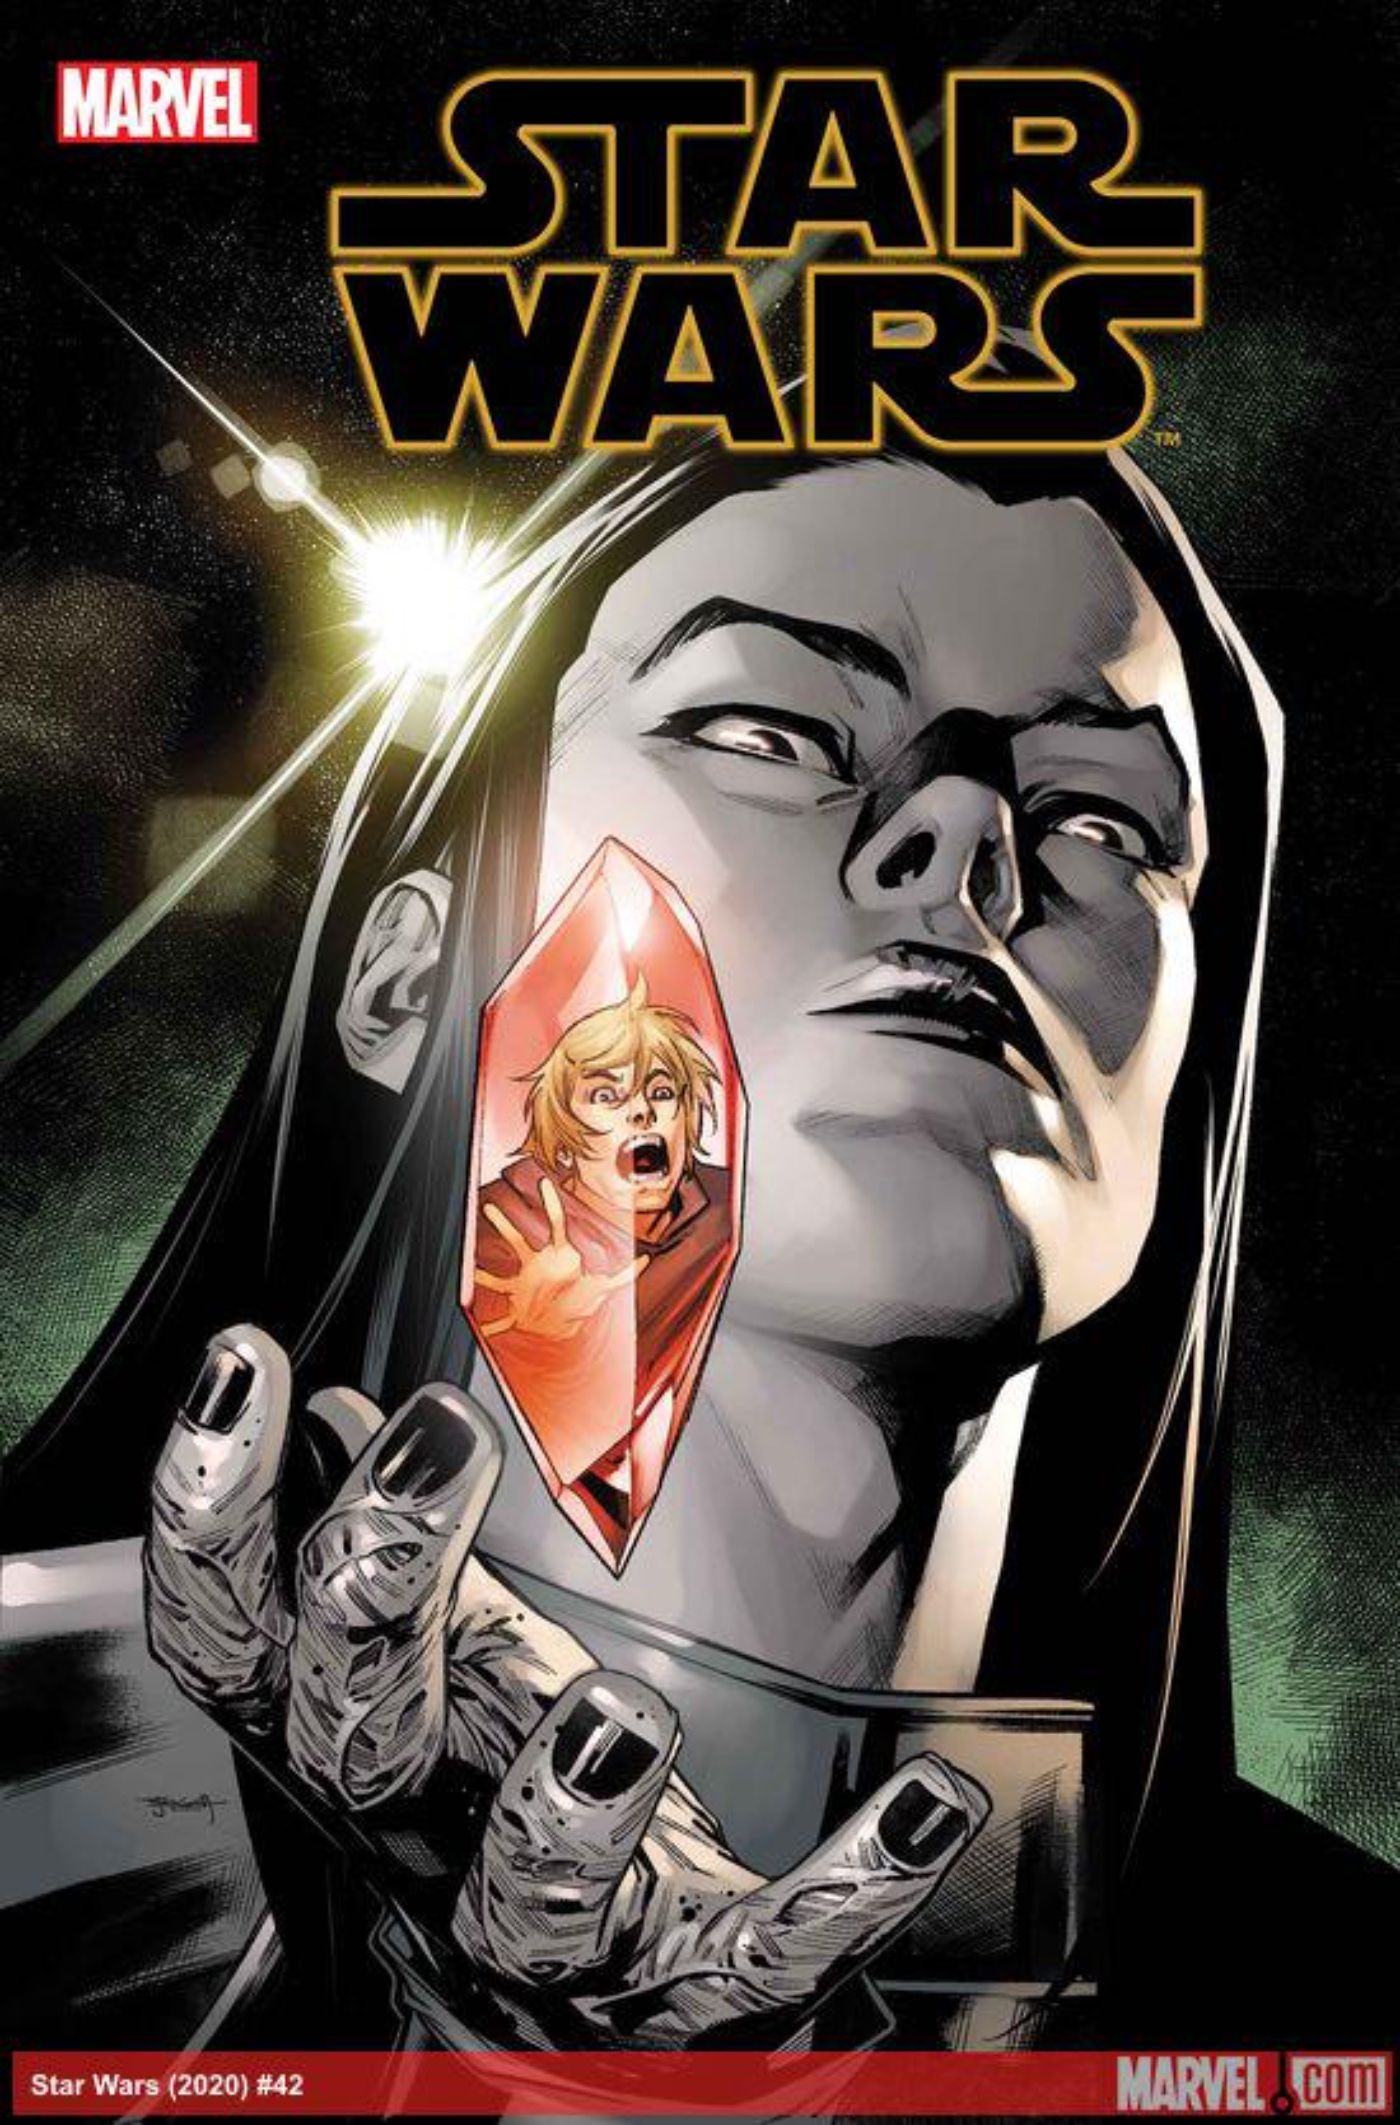 Star Wars #42 Cover Art, Sith holding kyber crystal with lUke Skywalker trapped inside